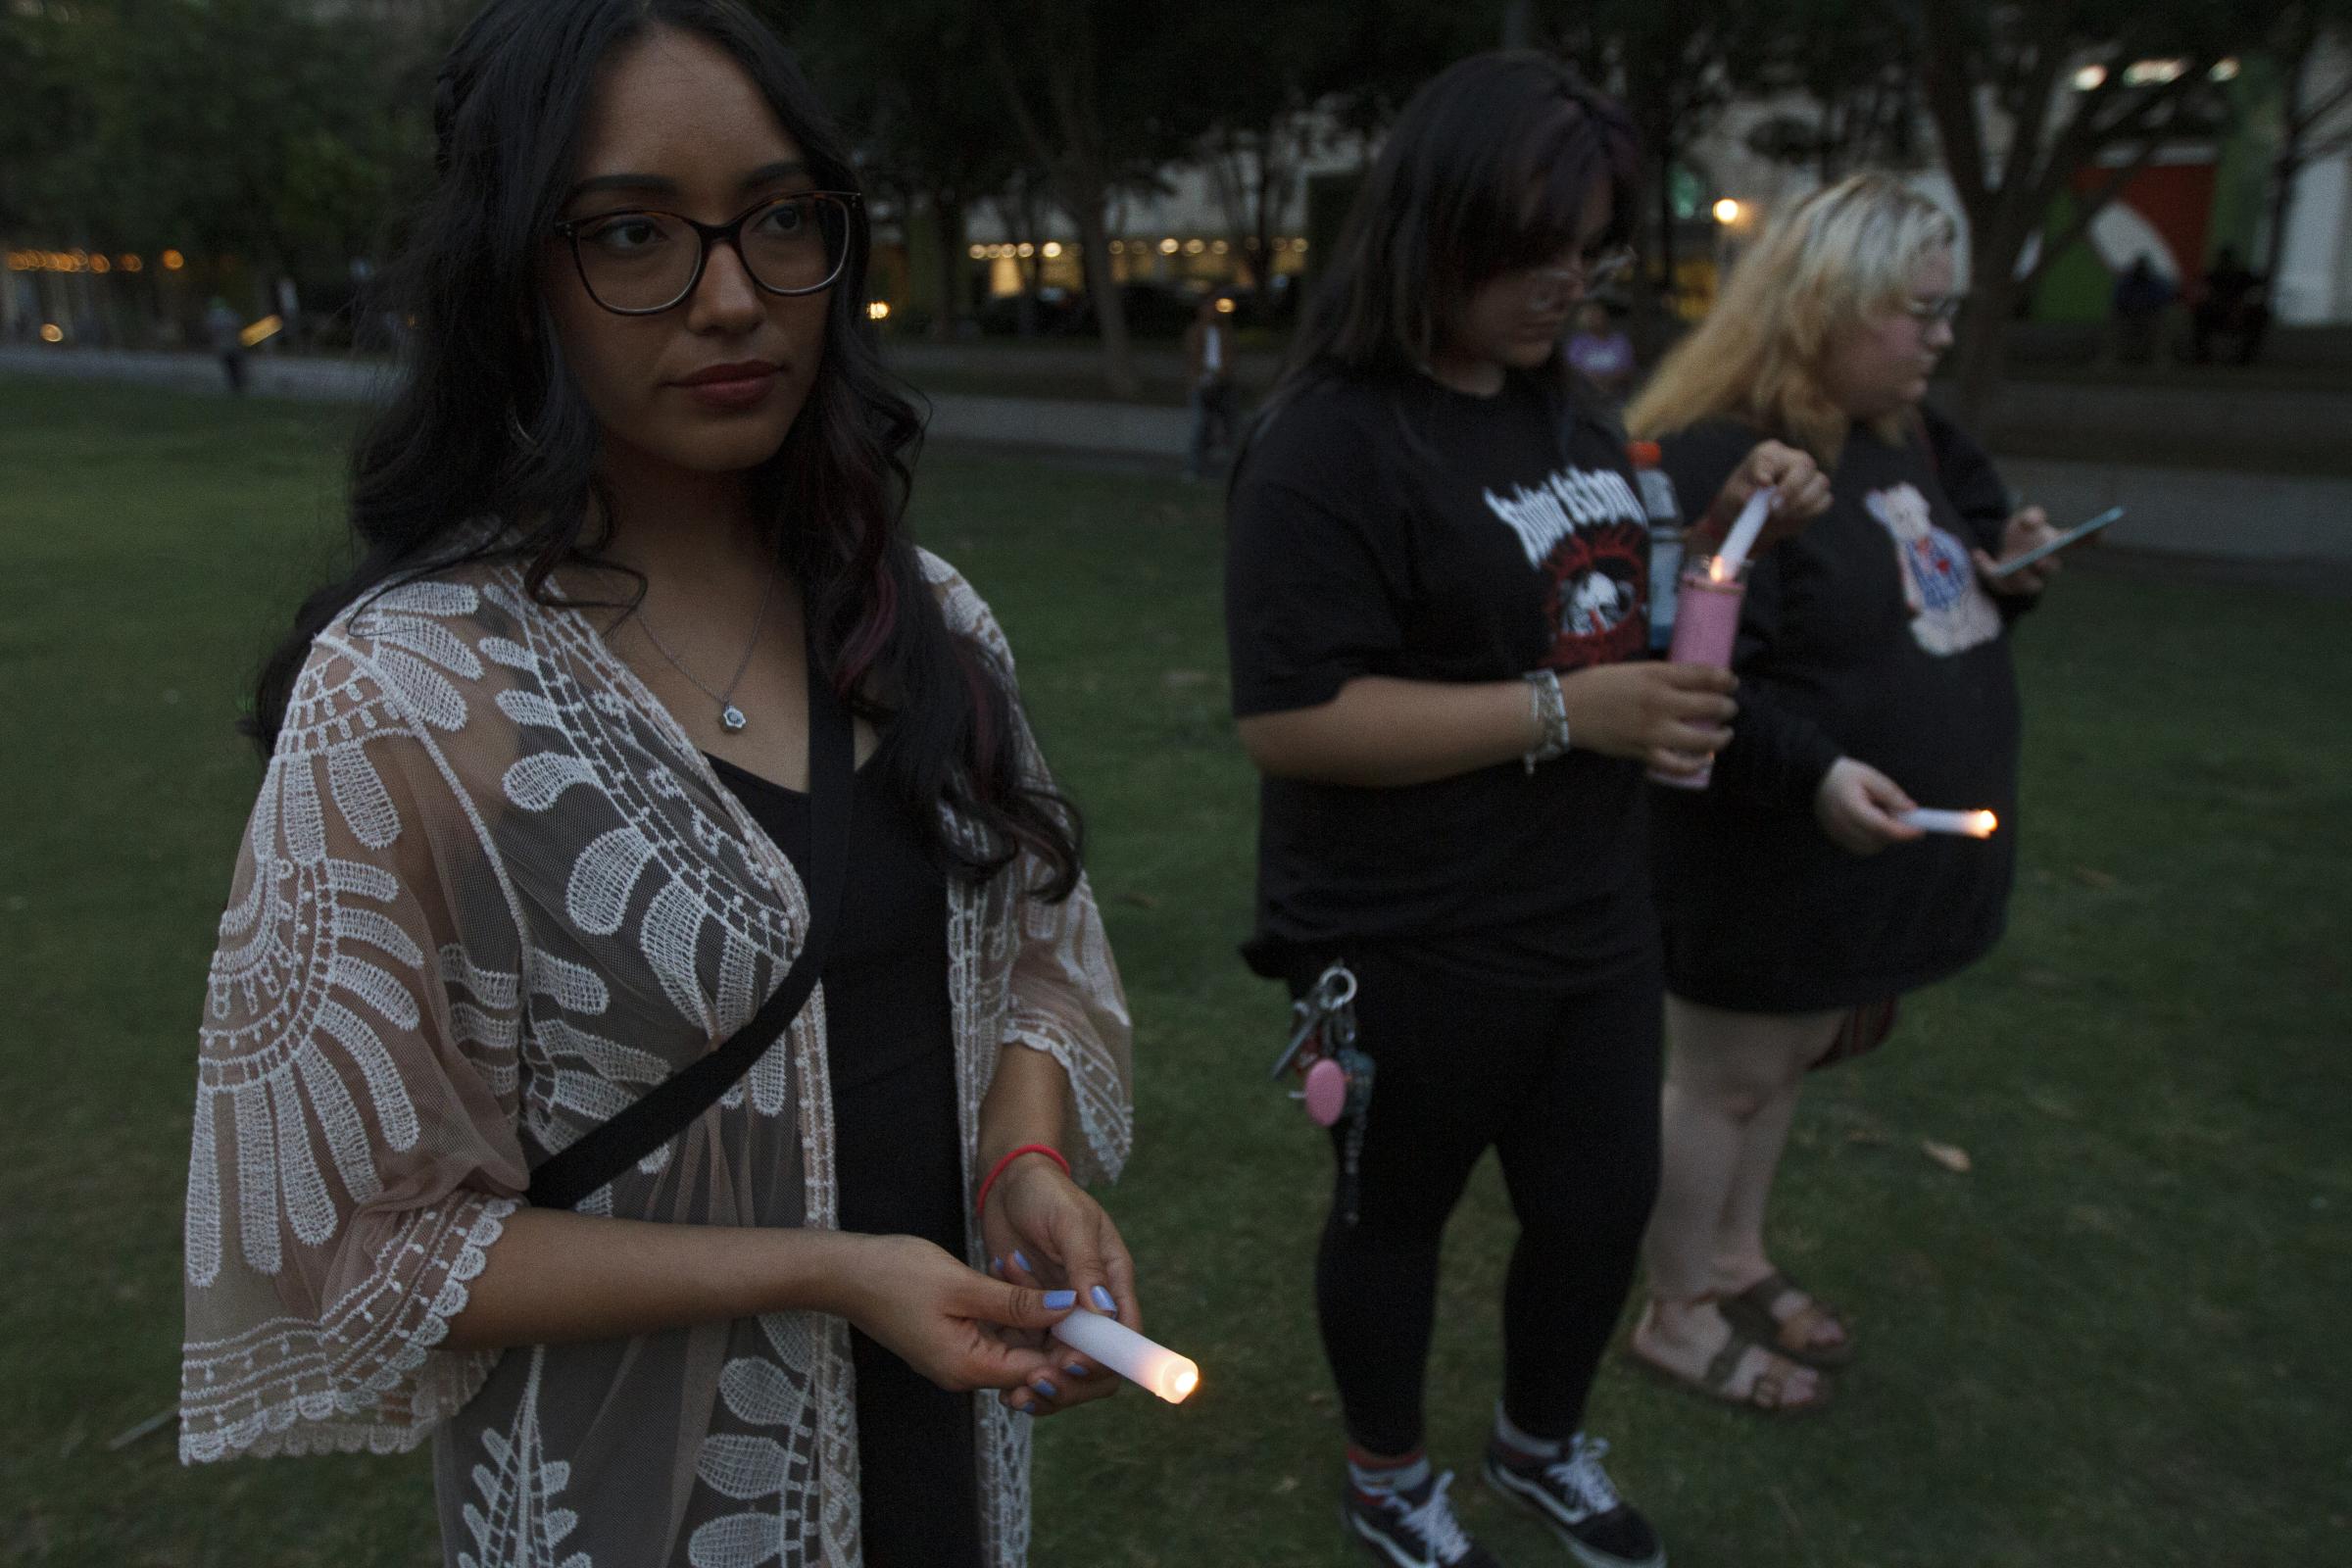 Candlelight Vigil for the Buffalo and Uvalde gun violence victims - Desiree Martinez a UCLA student attends the candlelight vigil at Main Street Garden in Dallas...